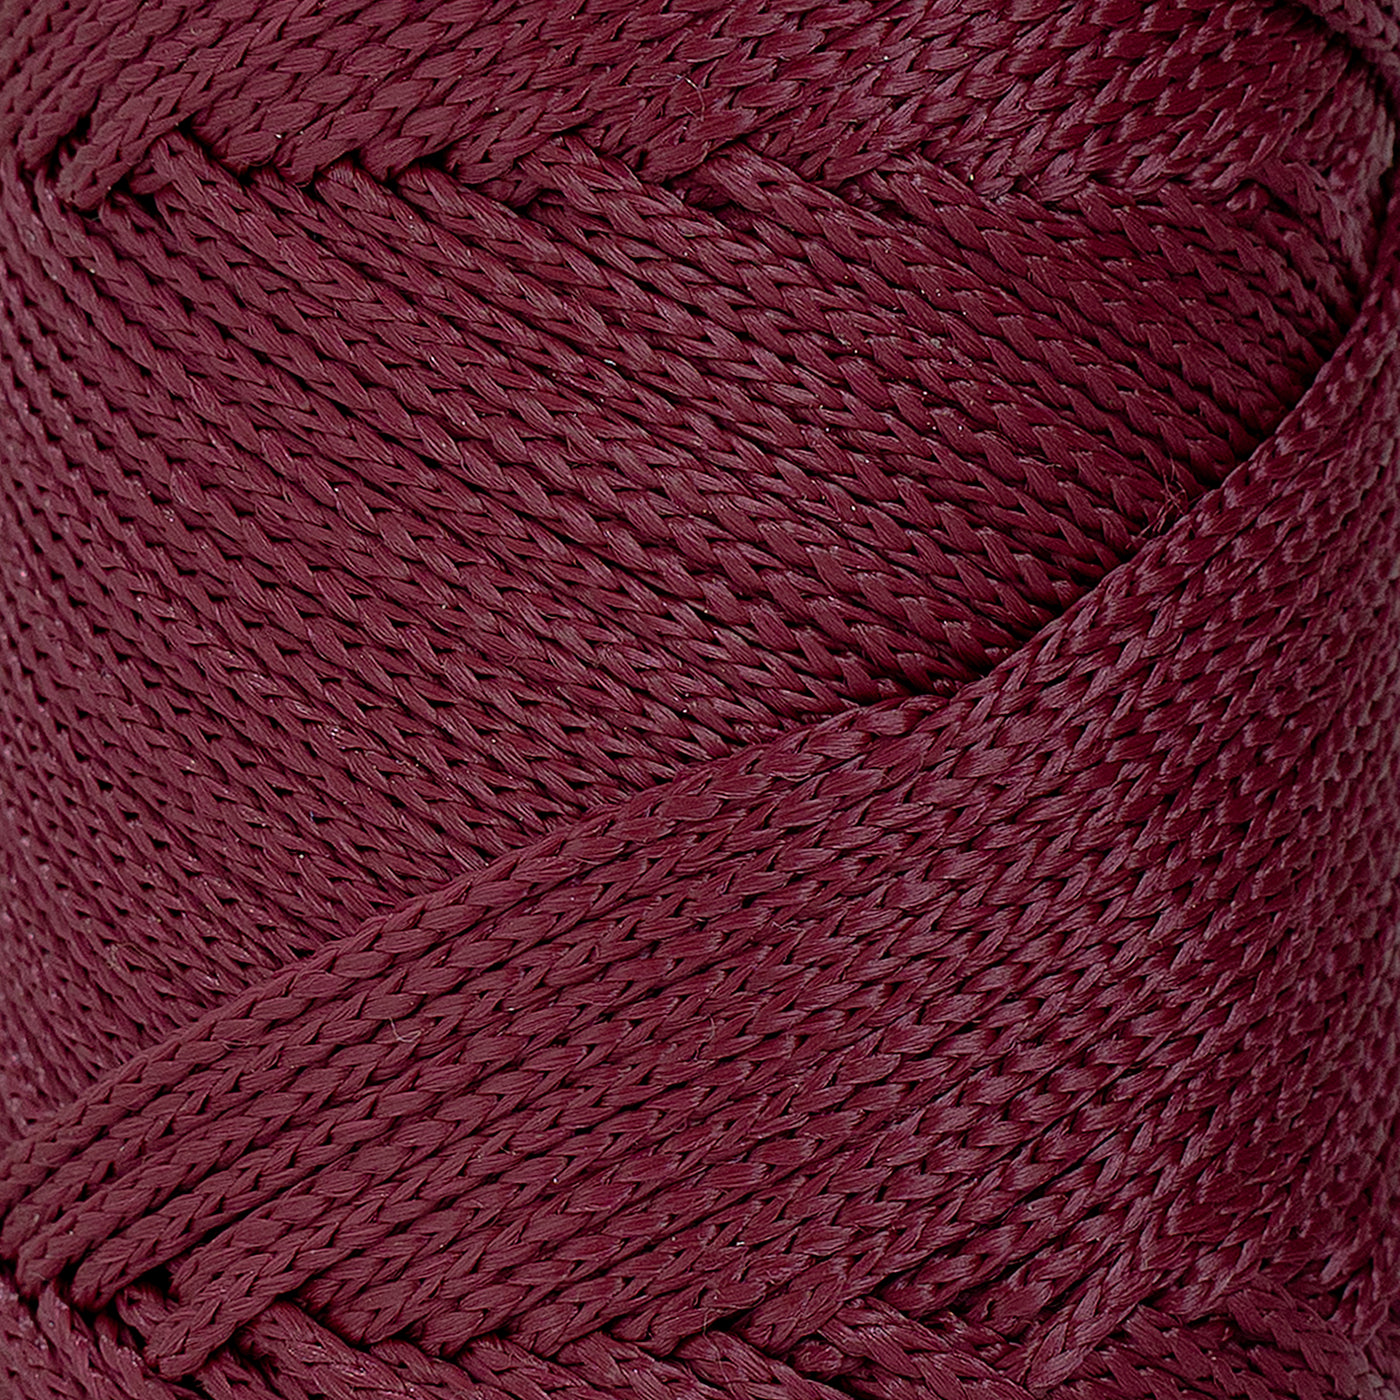 Outdoor 3 mm Macrame Braided Cord – Burgundy Color